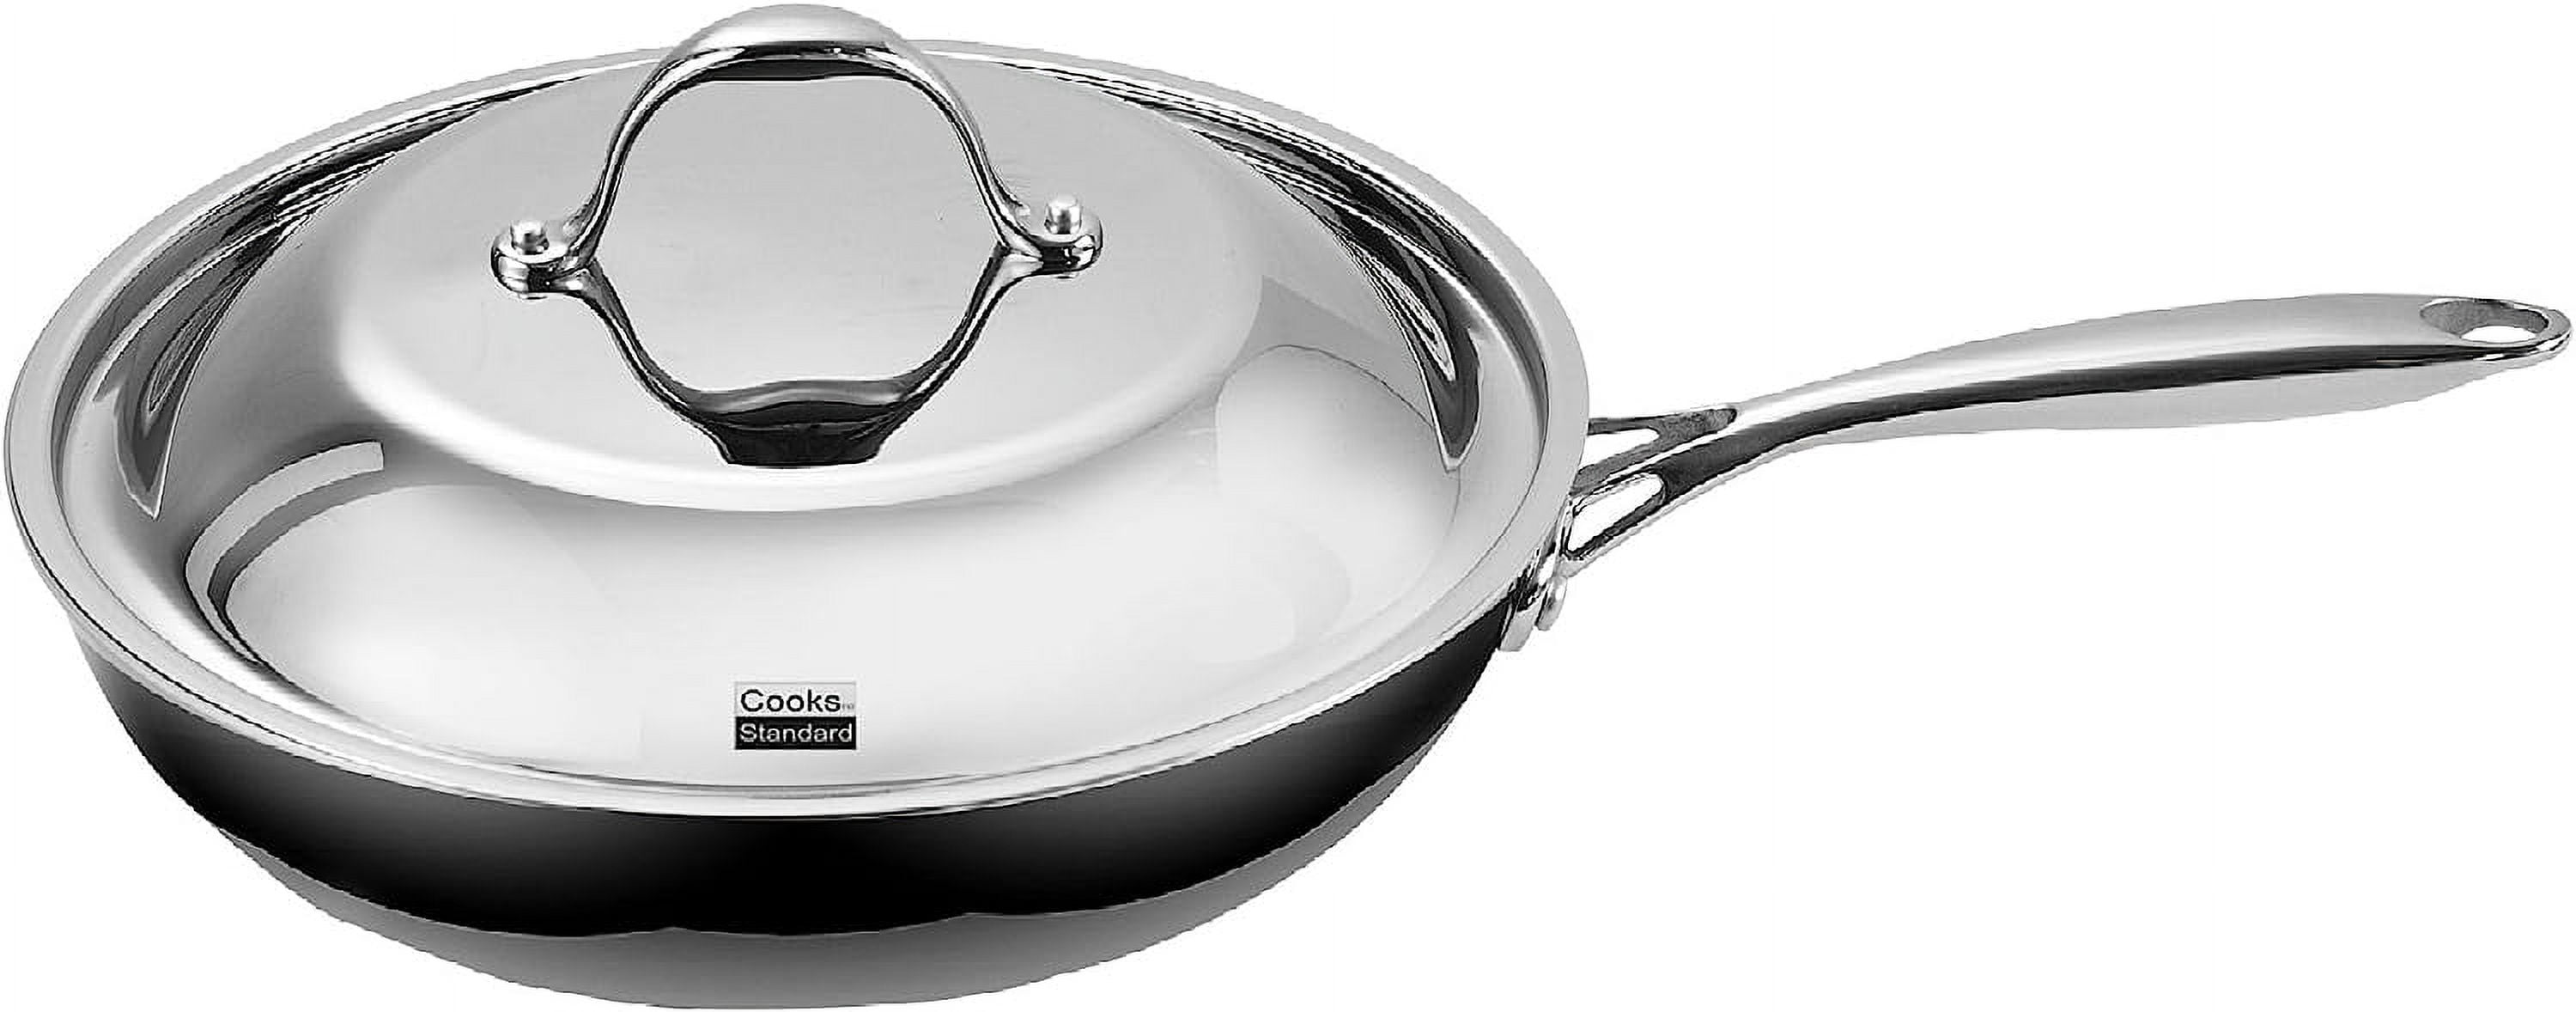 Cooks Standard Stainless Steel Frying Pan 12 Inch, Multi-Ply Full Clad Wok  Stir-Fry Cooking Pans with Dome Lid, Stay-Cool Handle, Dishwasher Safe,  Oven Safe 500°F, Silver 